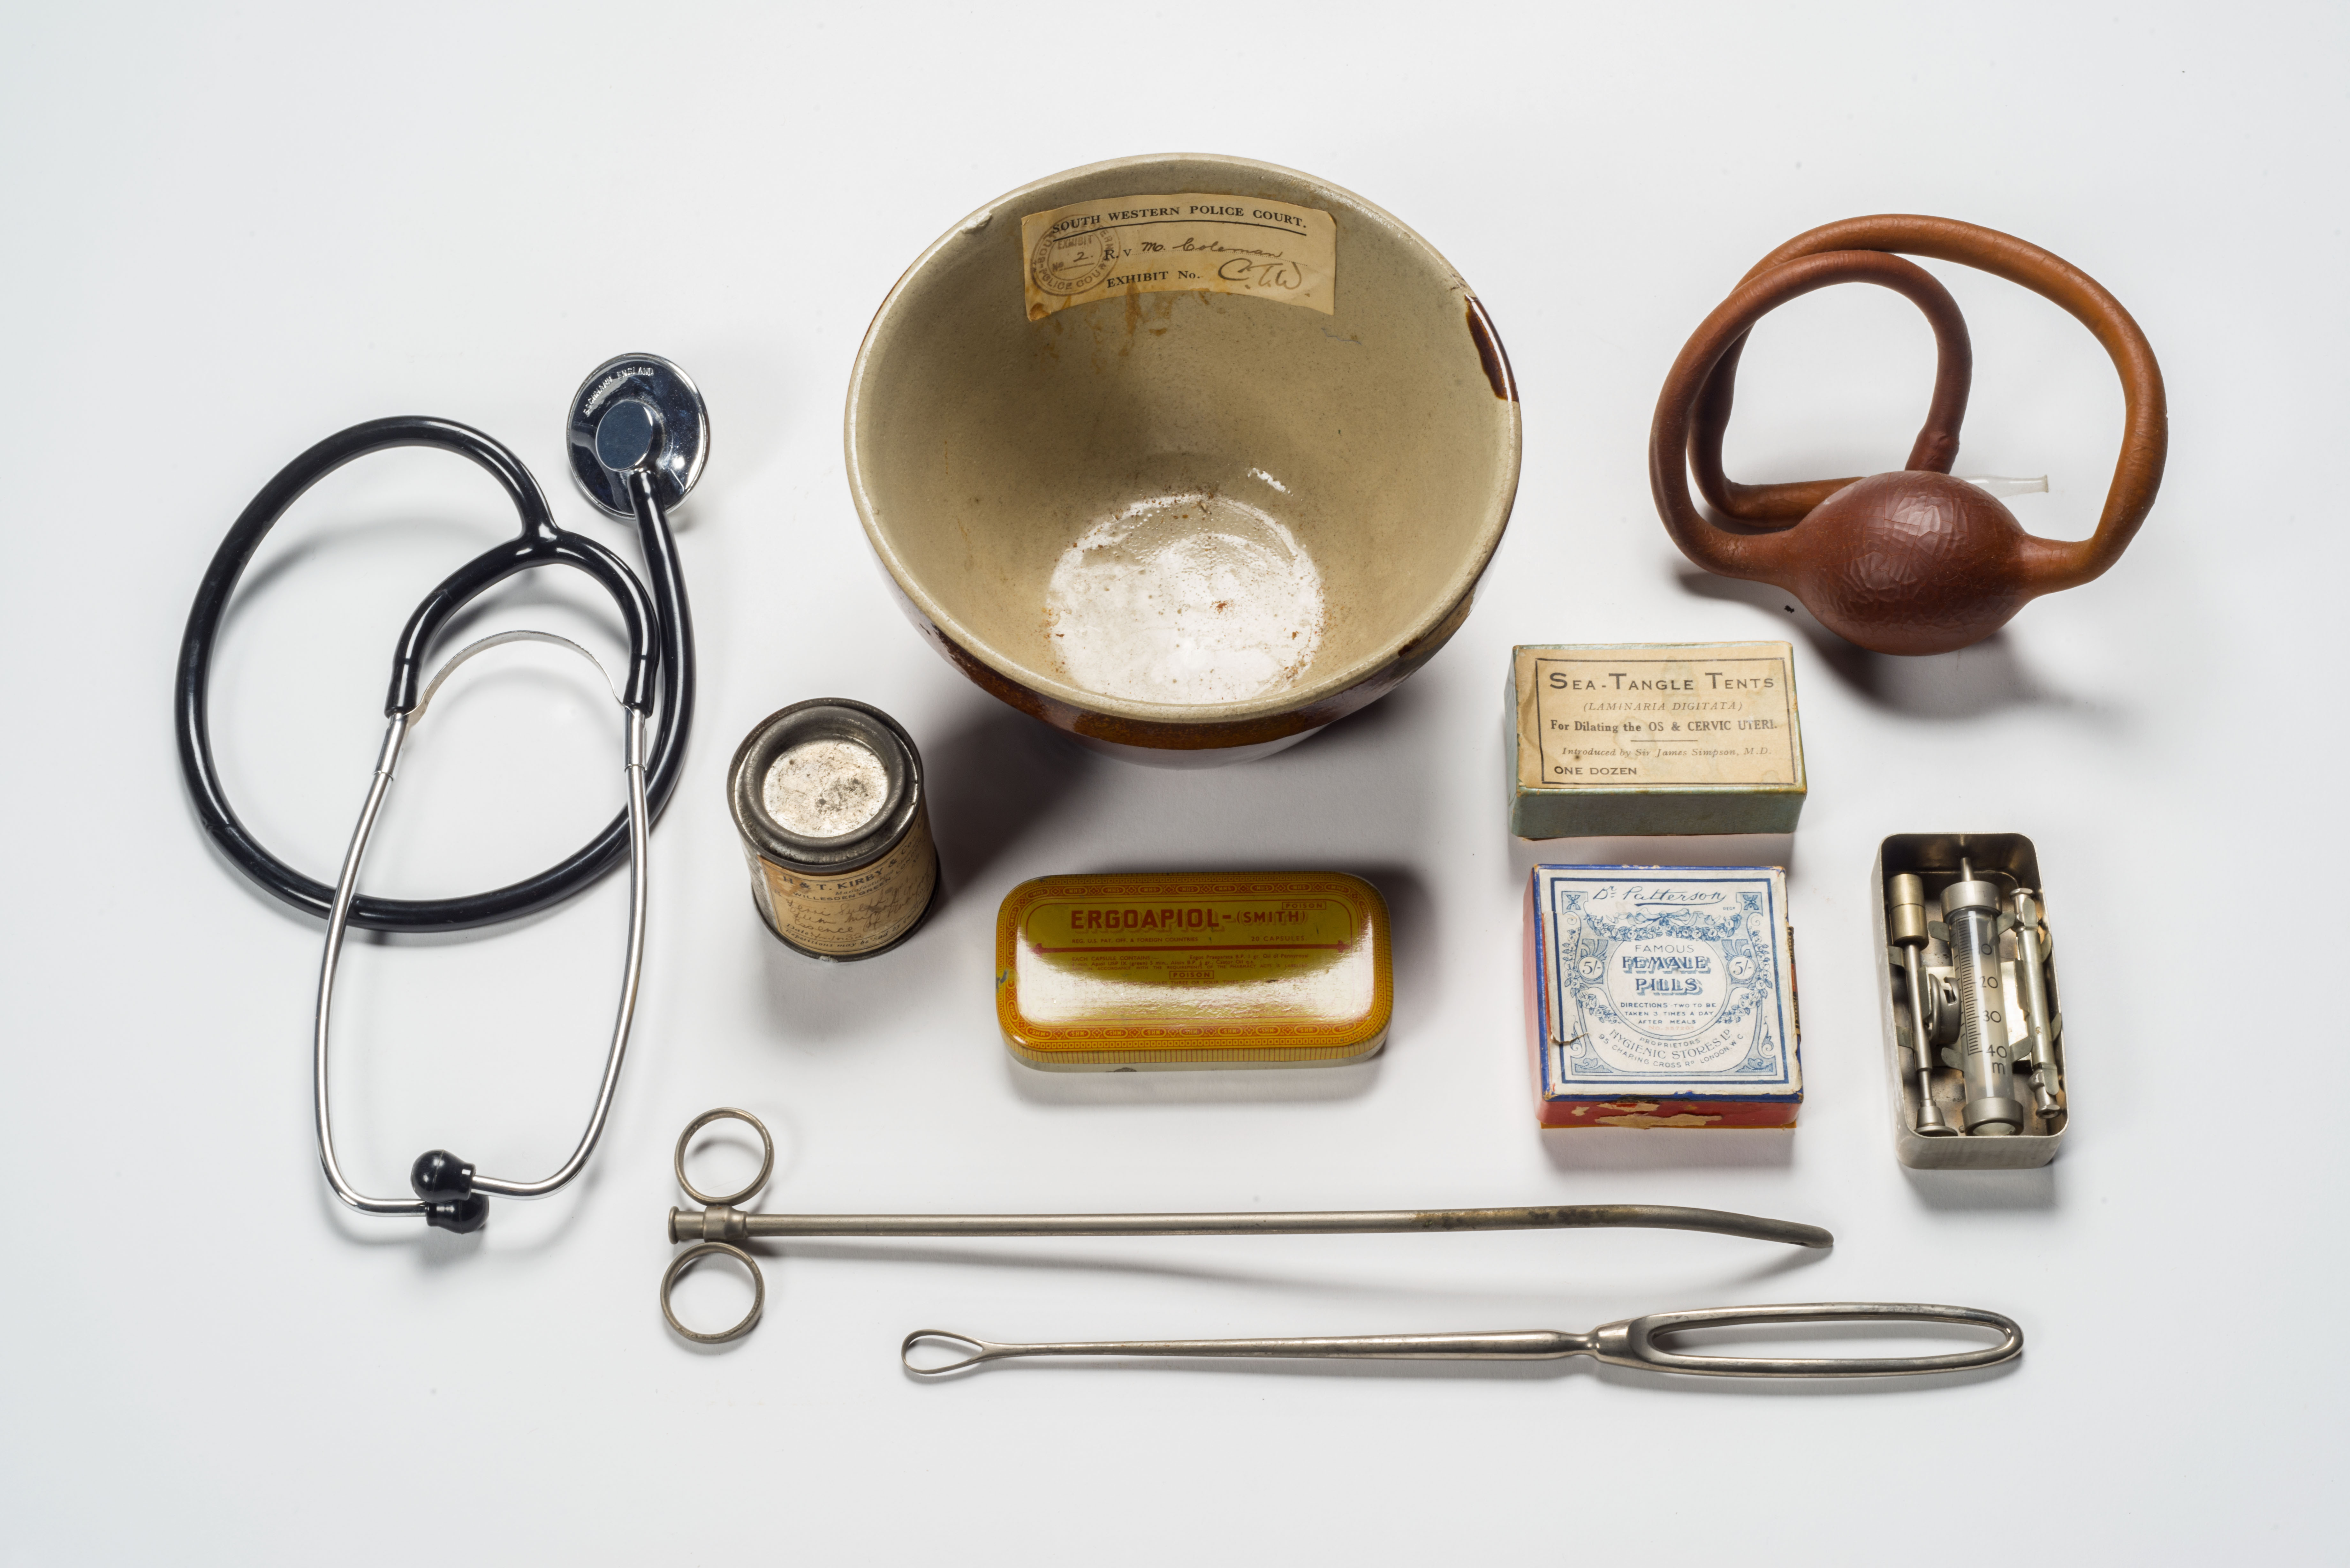 Medical implements and drugs used in administering illegal abortions, seized by Metropolitan Police, 20th century. © Museum of London / object courtesy the Metropolitan Police’s Crime Museum.